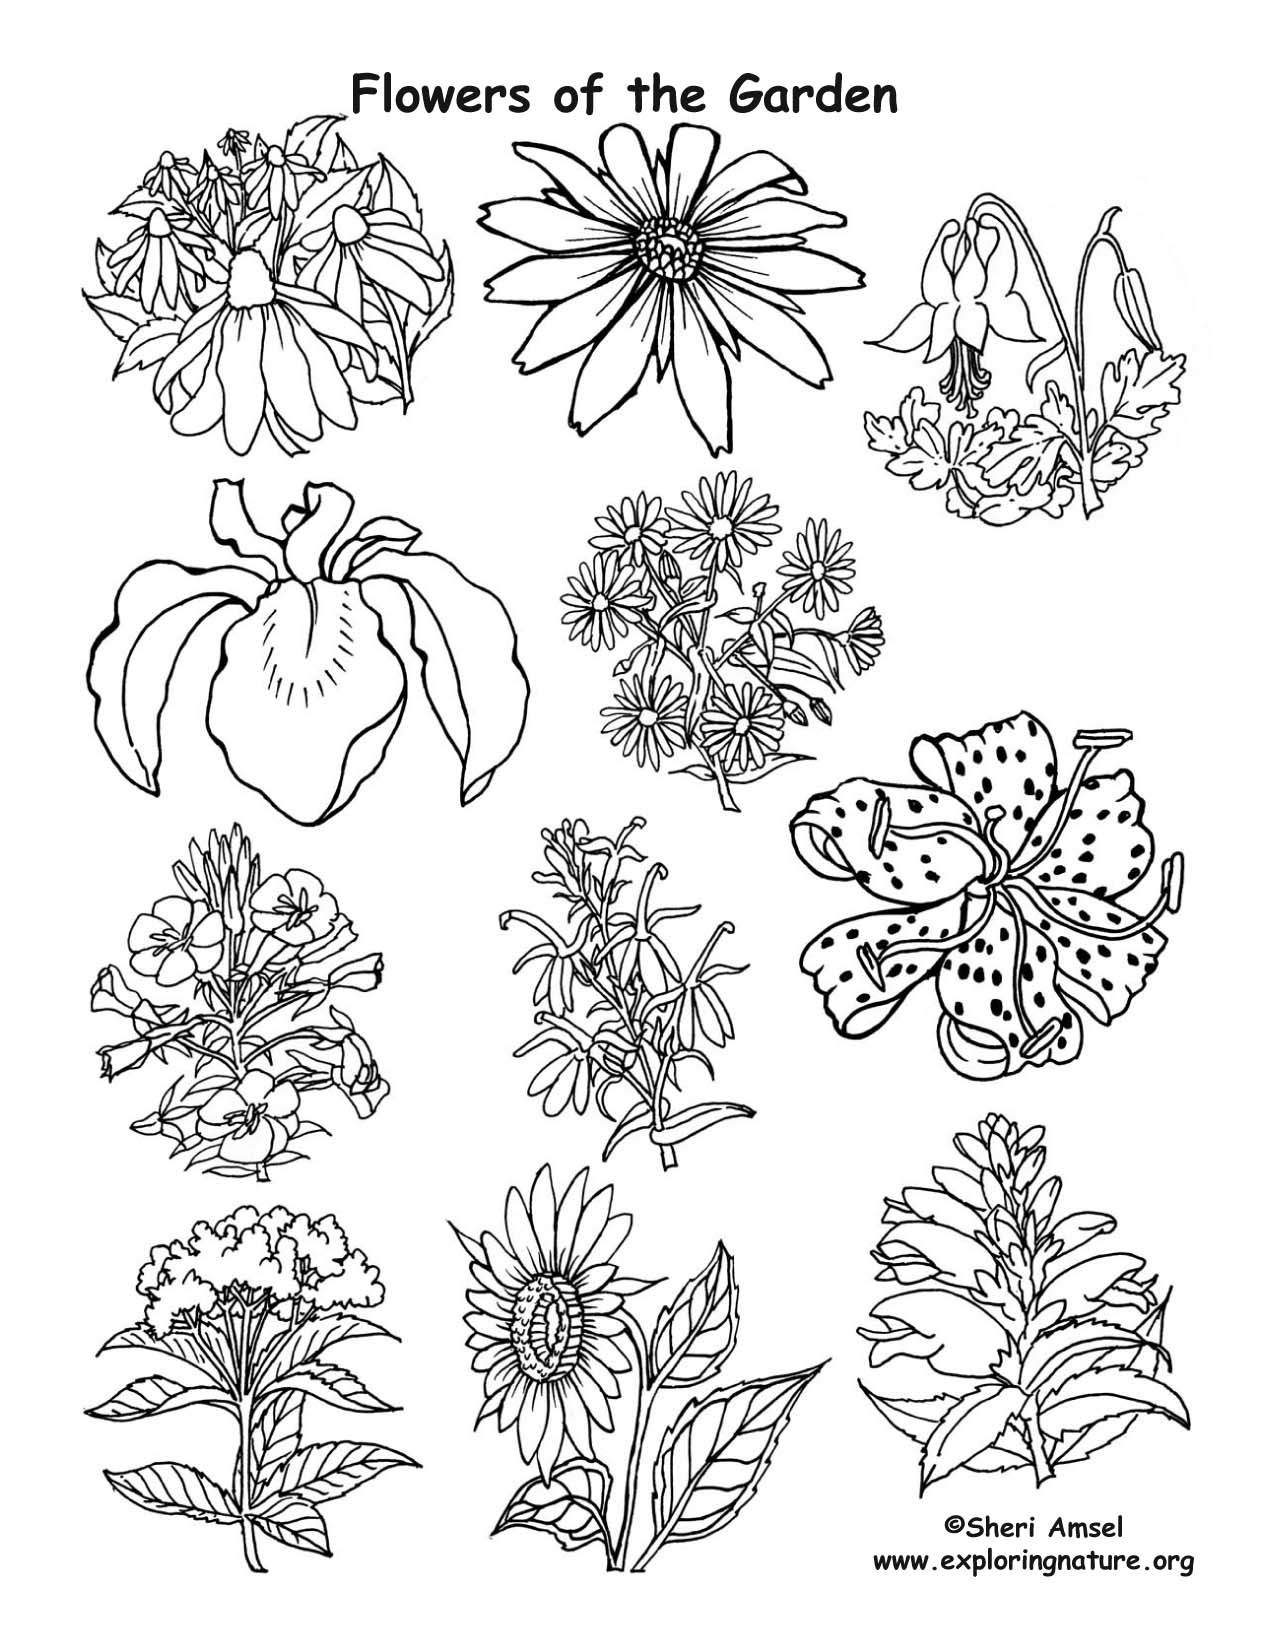 Download Flowers of the Garden Coloring Page